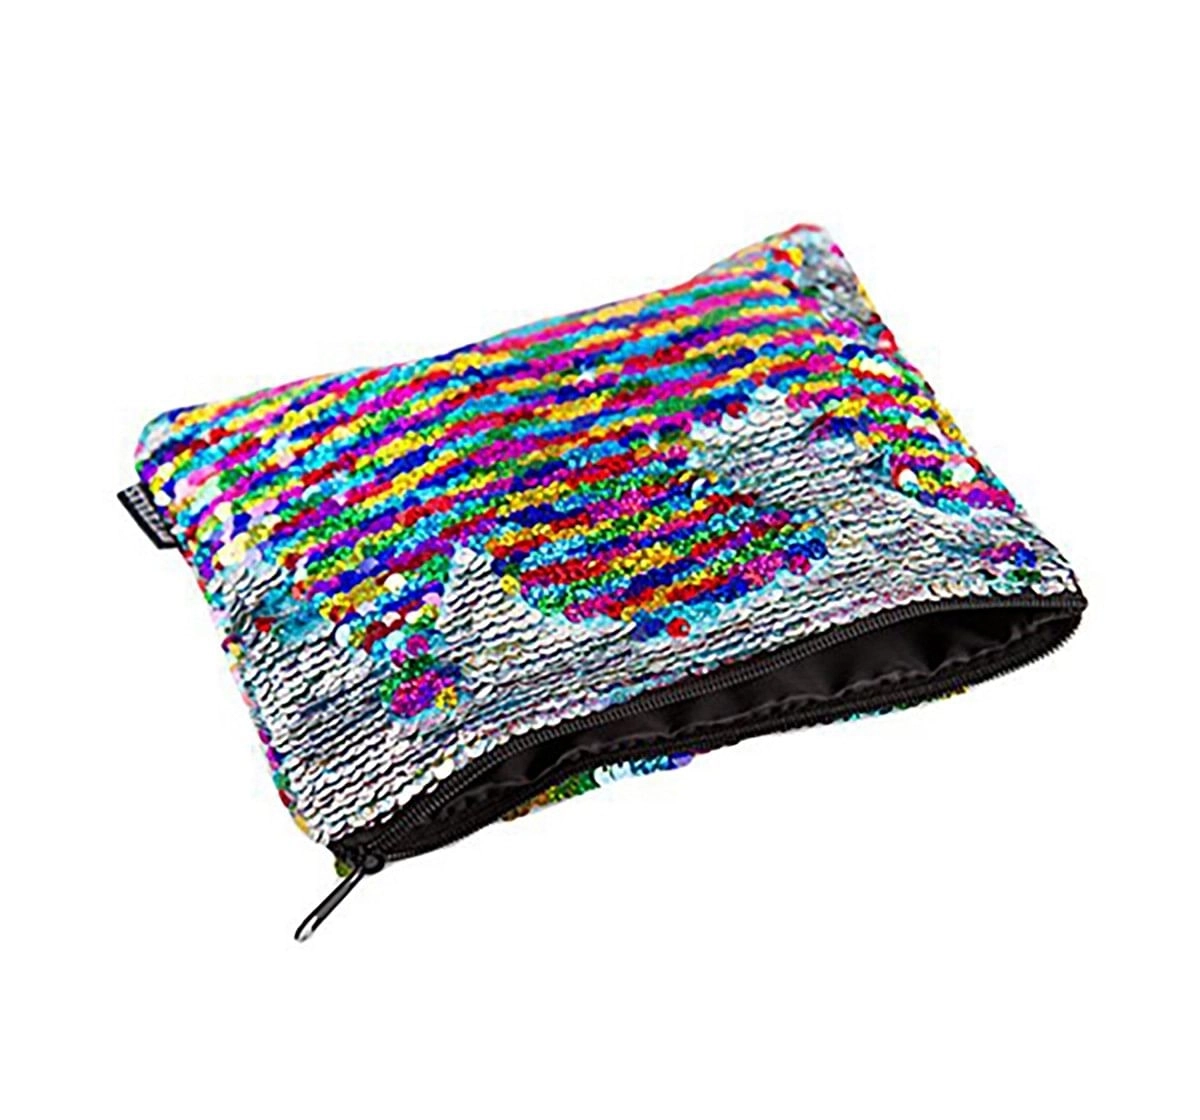 Fashion Angels Magic Sequin Pouch - Rainbow Pencil Pouches & Boxes for age 3Y+ 